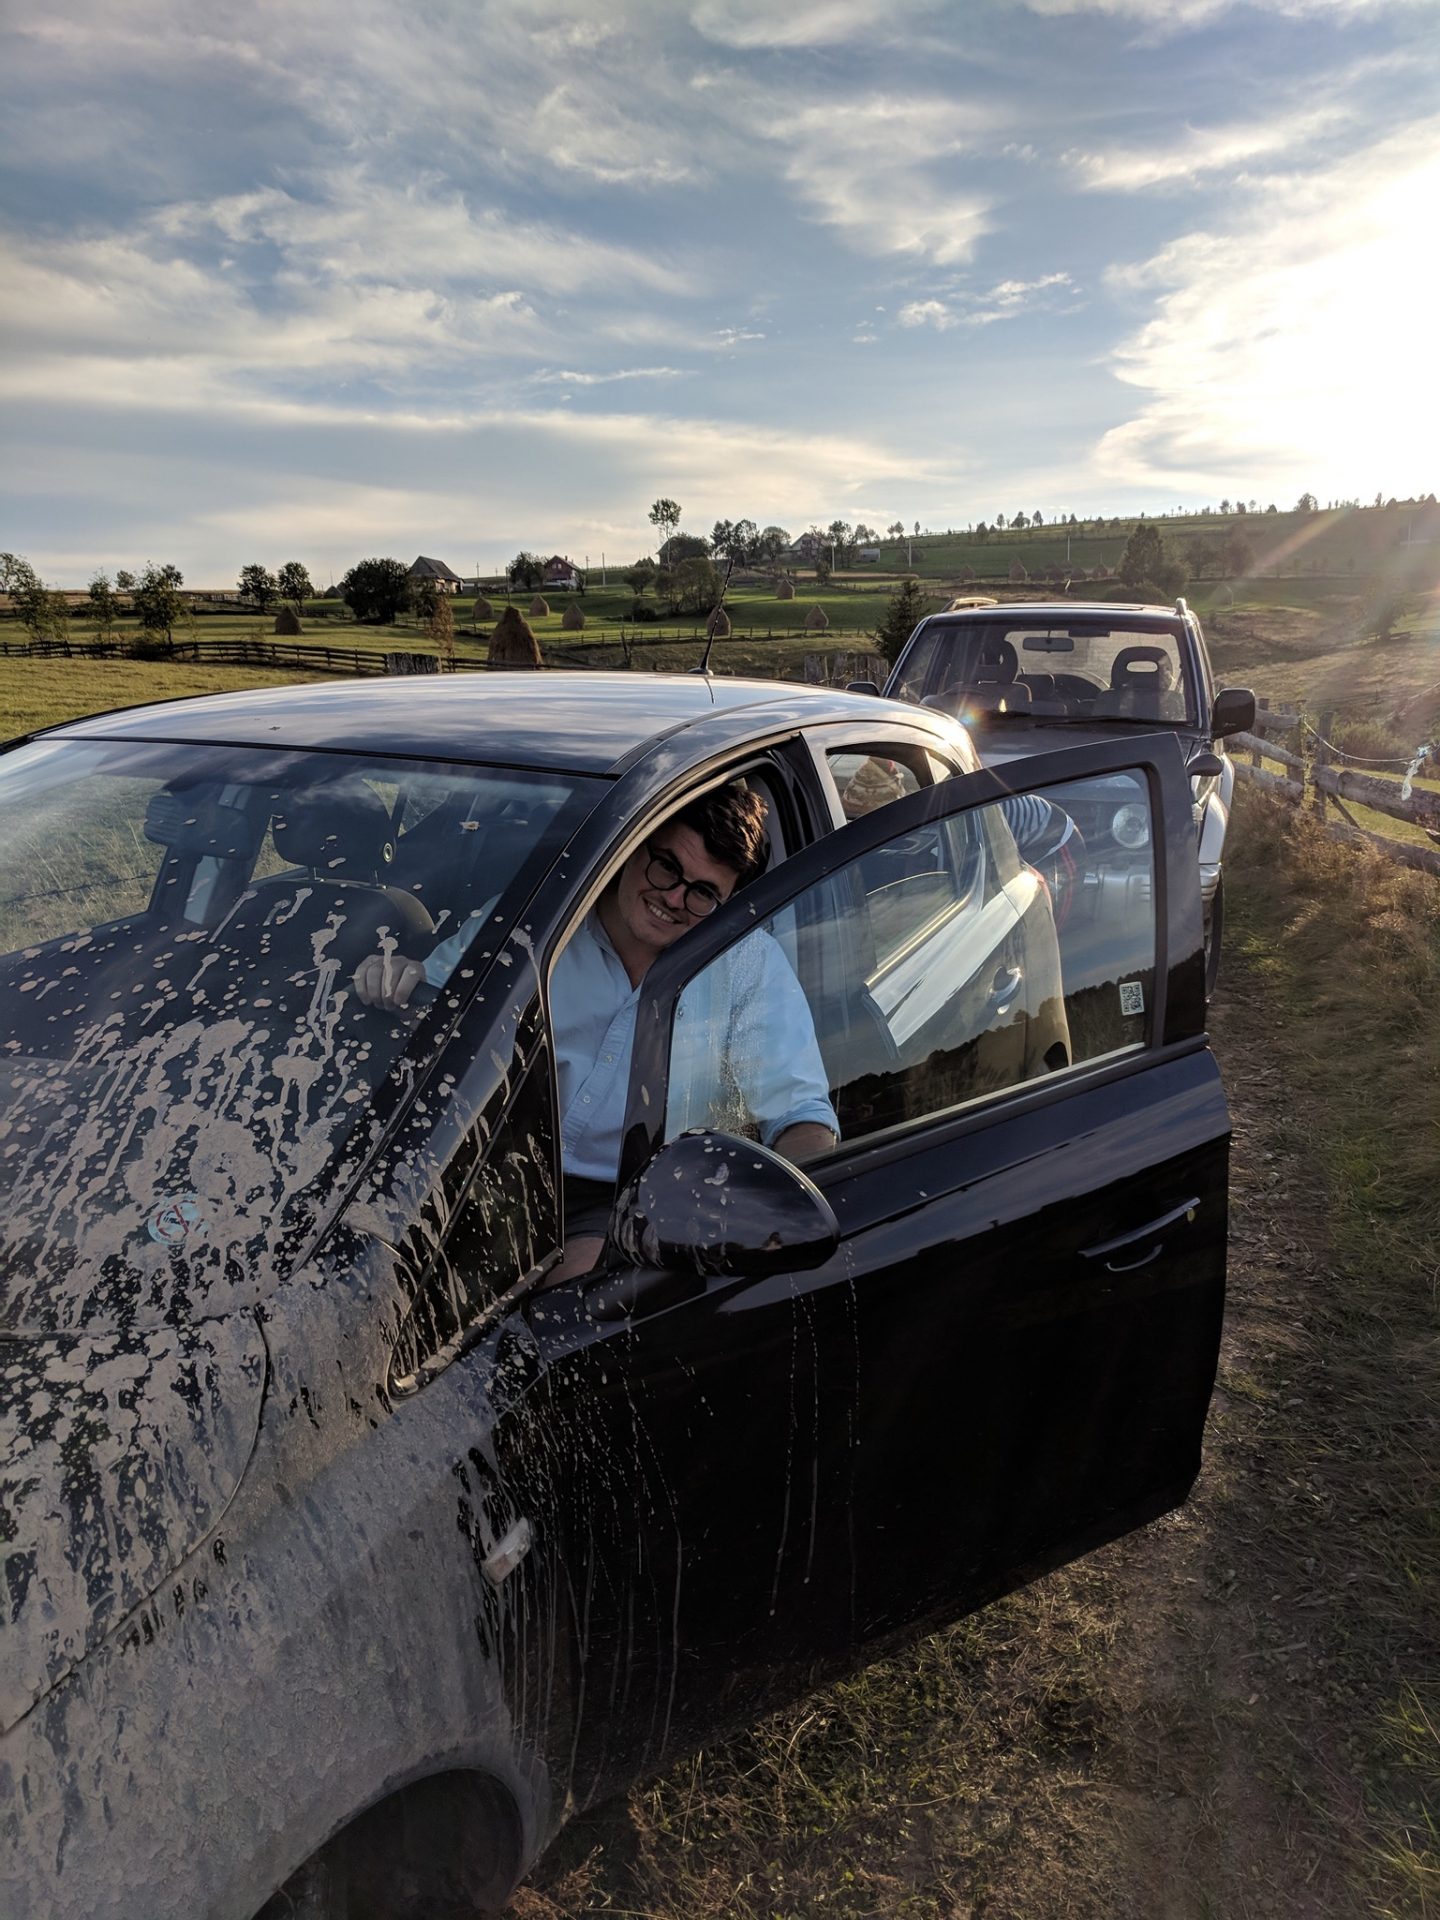 Billy in a very muddy car, whilst stuck in a muddy puddle.